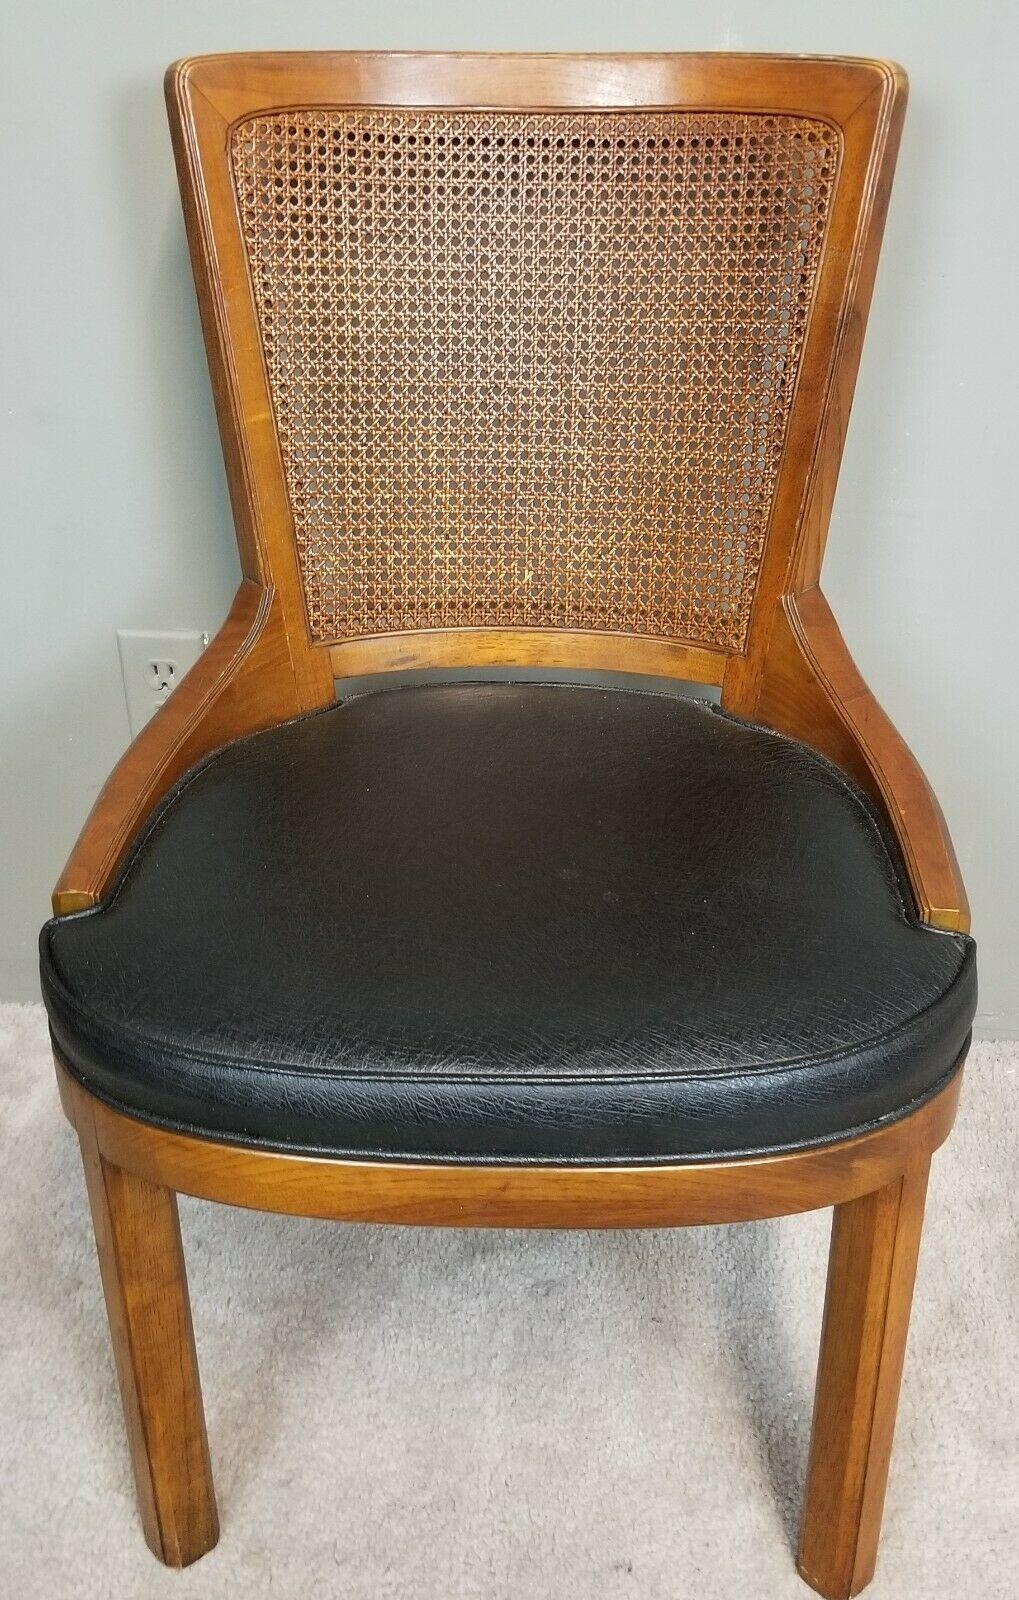 Offering One Of Our Recent Palm Beach Estate fine Furniture Acquisitions Of A 
Vintage Henredon cane back dining desk chair 1970s Model 28-5001

Approximate Measurements in Inches
32 1/2